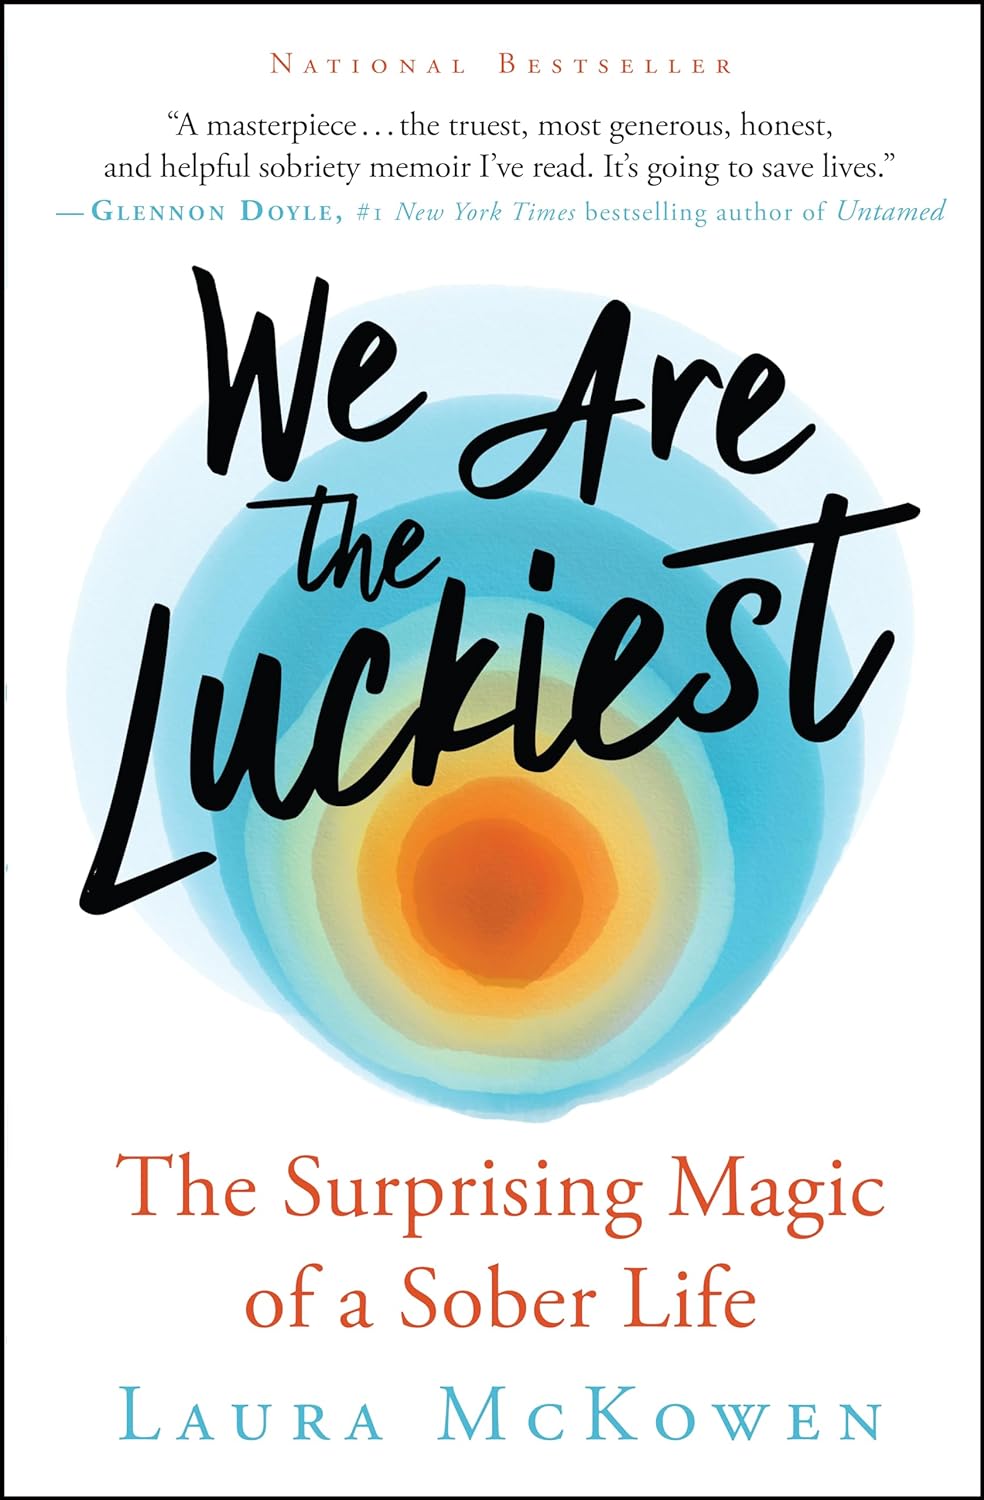 <p><a href="https://www.amazon.com/We-Are-Luckiest-Surprising-Magic/dp/1608687864/?tag=skmsn-20"><em>We Are the Luckiest</em></a> is the debut memoir from Laura McKowen, founder and CEO of the digital recovery program The Luckiest Club. McKowen herself overcame an alcohol use disorder. In the throes of her struggle to get sober, she realized just how lucky she was to feel her feelings again and fully connect with her family. This reframe helped her power through; eventually, it also inspired her to help others get sober. She chronicles all of this and more with grace and humility — and without sugarcoating the harsh realities of being addicted to alcohol.</p> <a href="https://www.amazon.com/dp/1608687864?tag=skmsn-20&linkCode=ogi&th=1&psc=1&language=en_US&asc_source=web&asc_campaign=web&asc_refurl=https%3A%2F%2Fwww.sheknows.com%2F%3Fpost_type%3Dpmc-gallery%26p%3D2892532" rel="nofollow">Buy: 'We Are the Luckiest' $11.19</a>